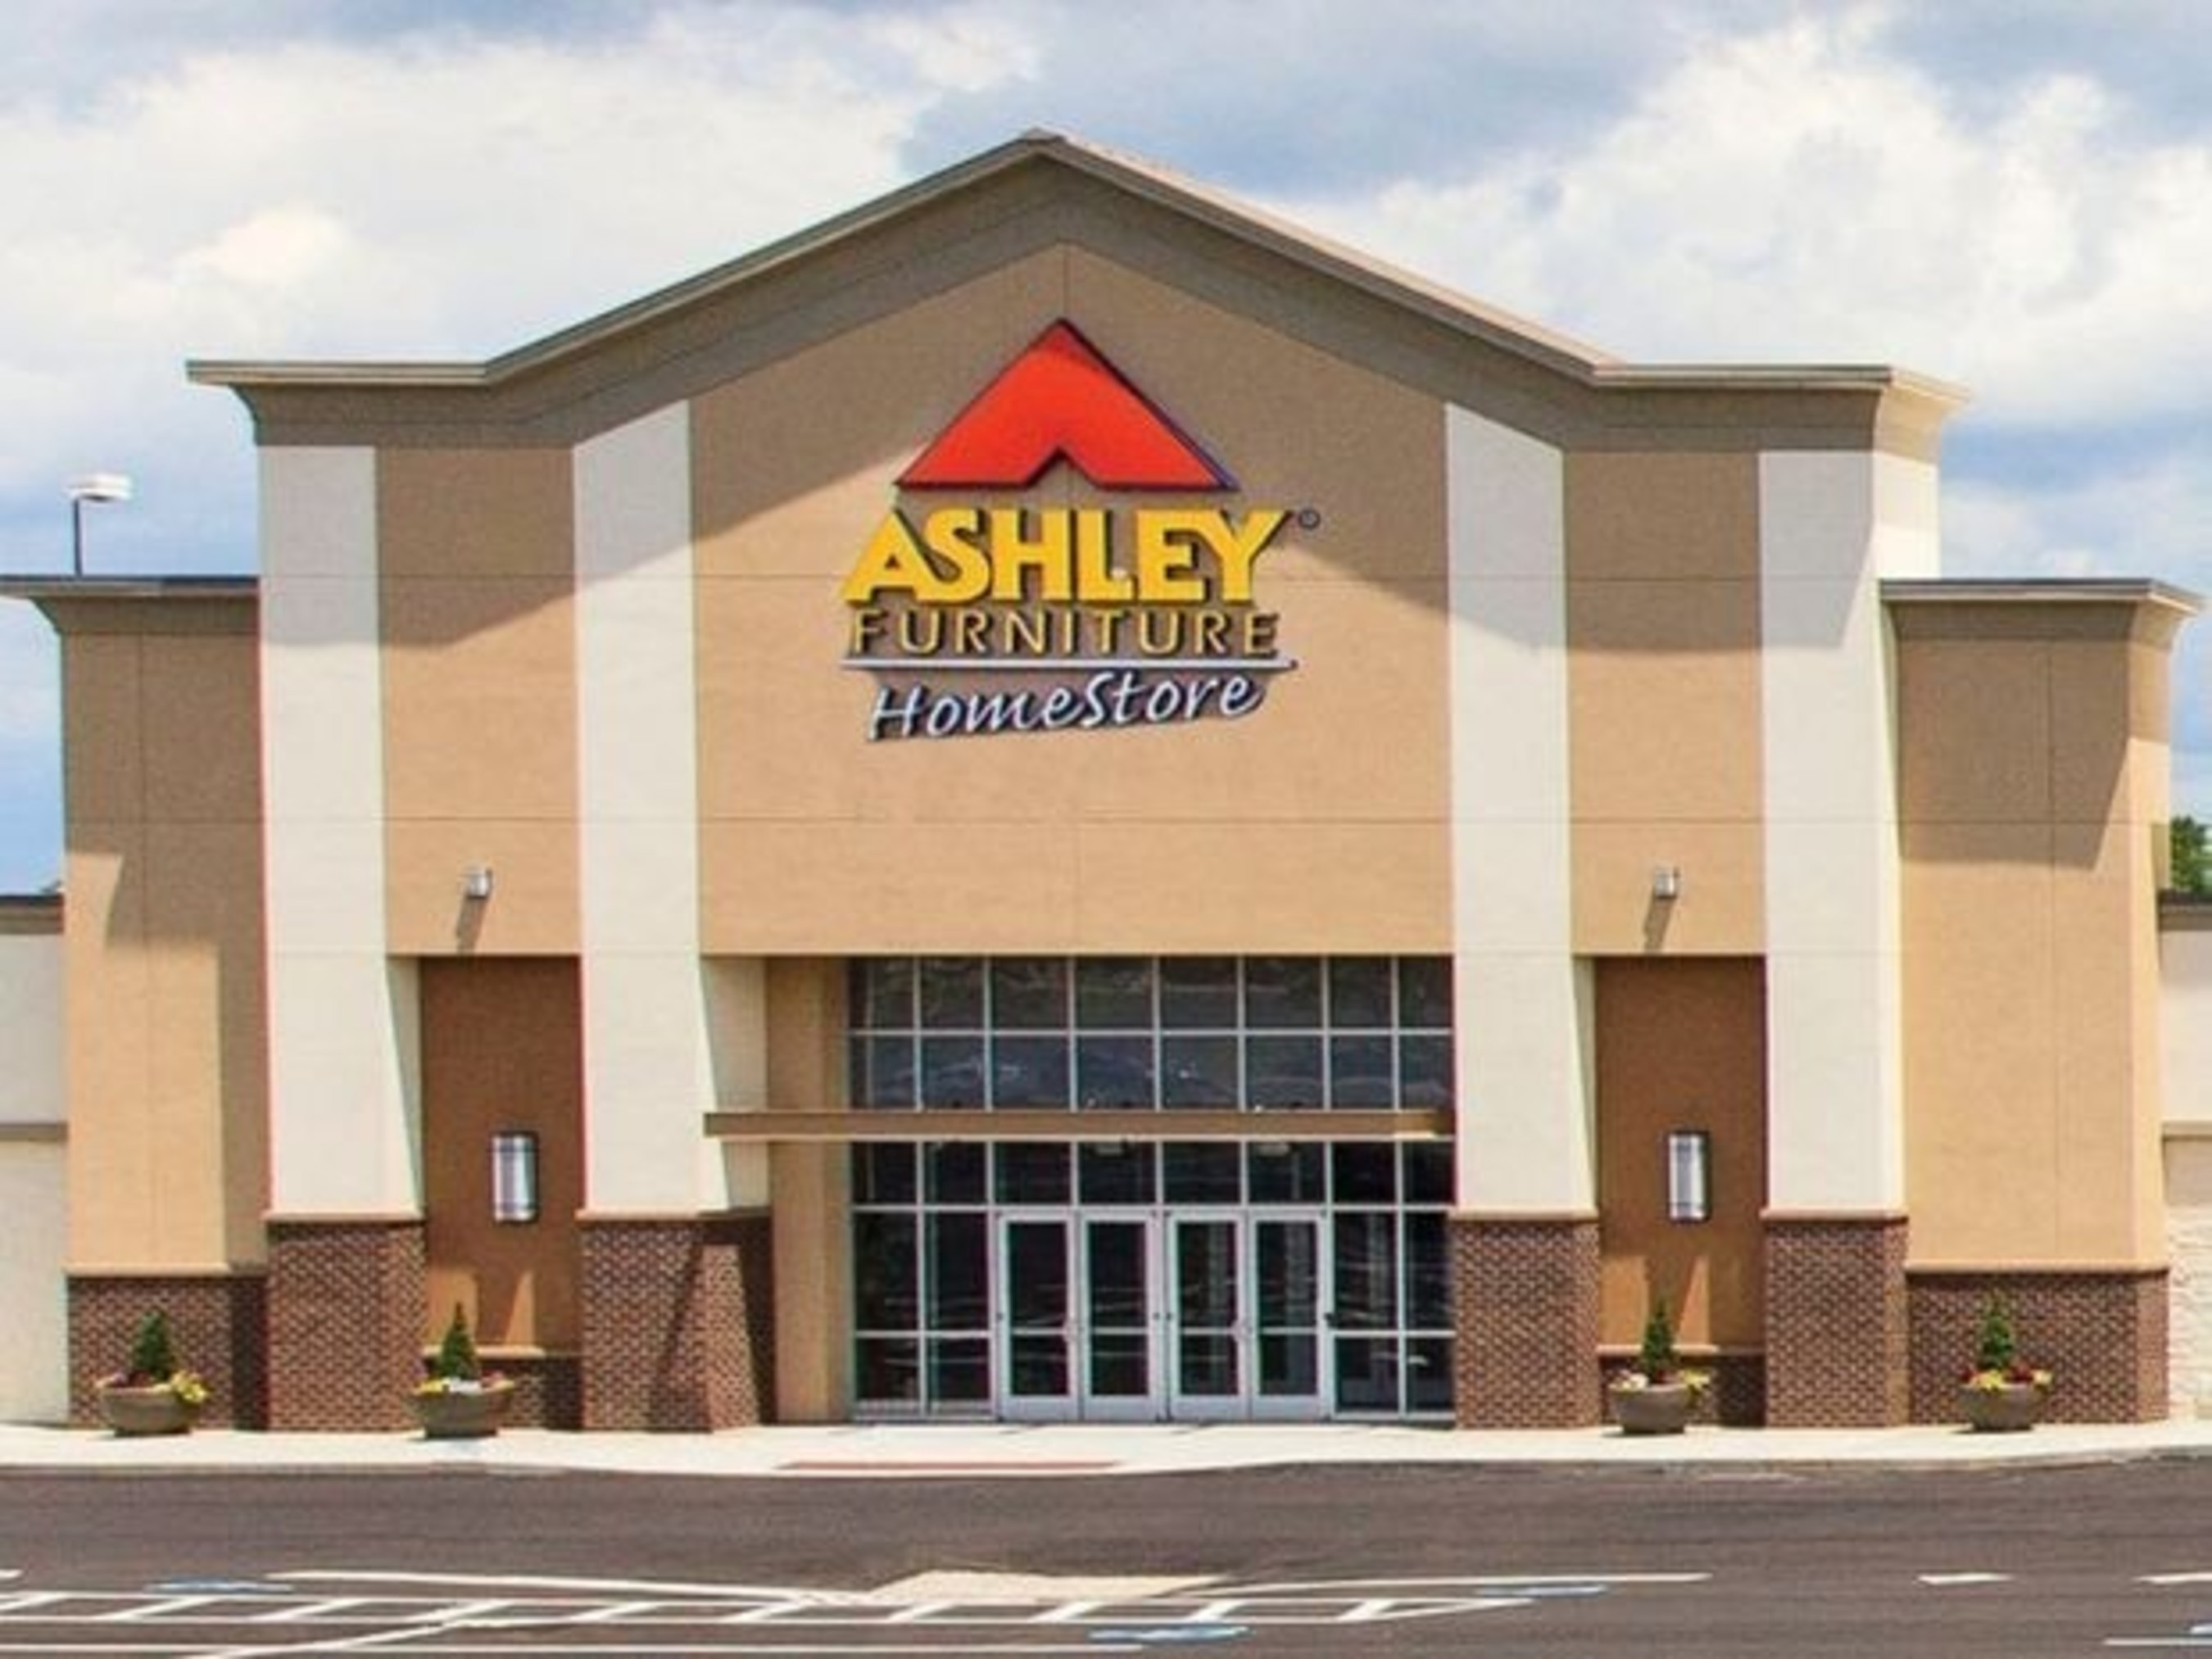 $1.5 Million "Big Game Promotion" Give Away: Ashley Furniture HomeStore Customers Win Big With Ohio's National Championship Victory!